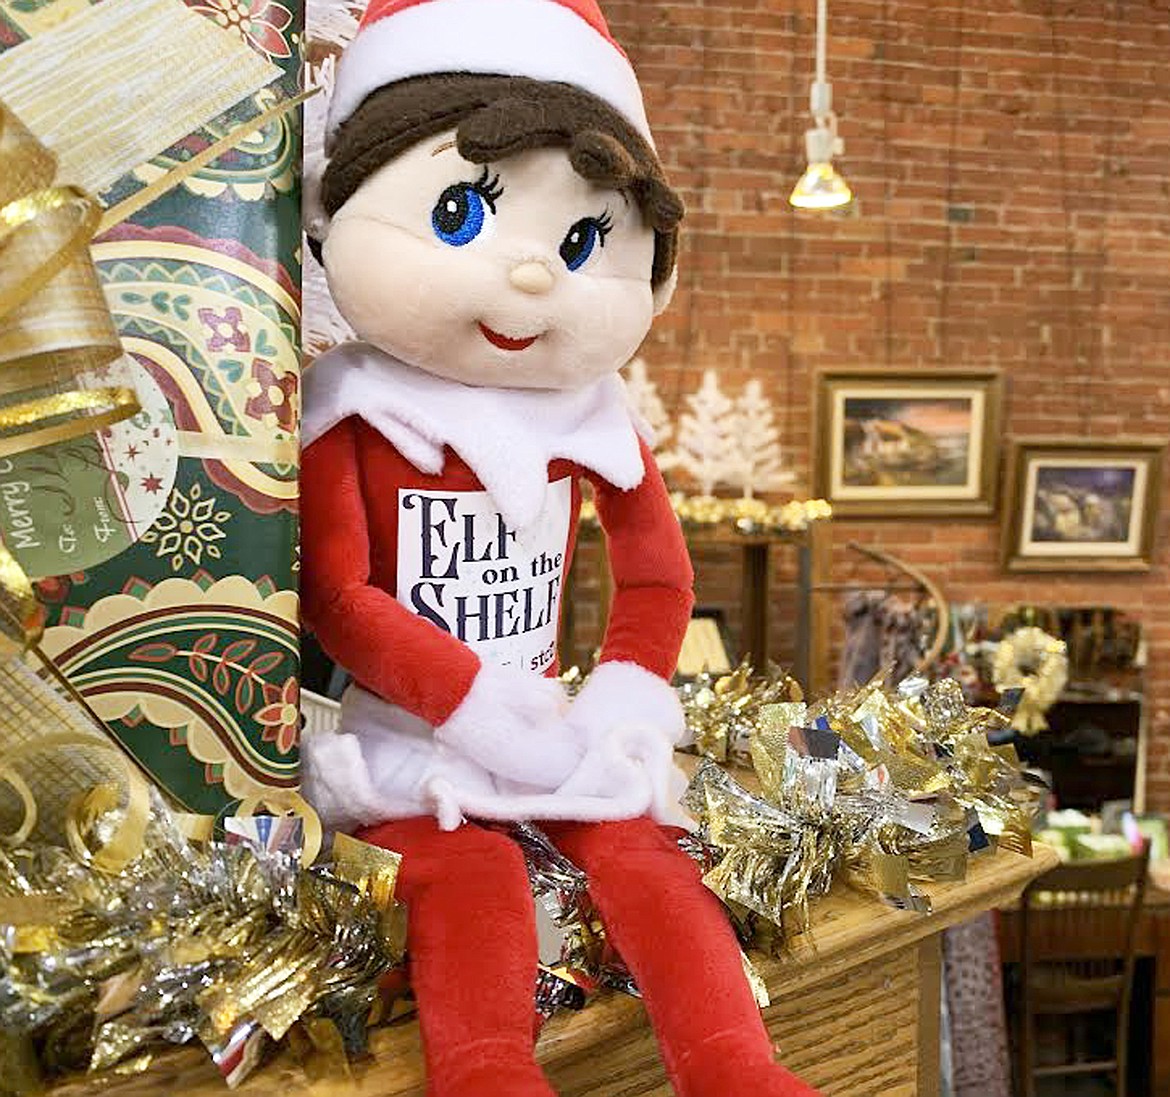 The Elf on the Shelf program will be Fridays, Saturdays and Sundays during the holidays at some downtown Coeur d'Alene shops.